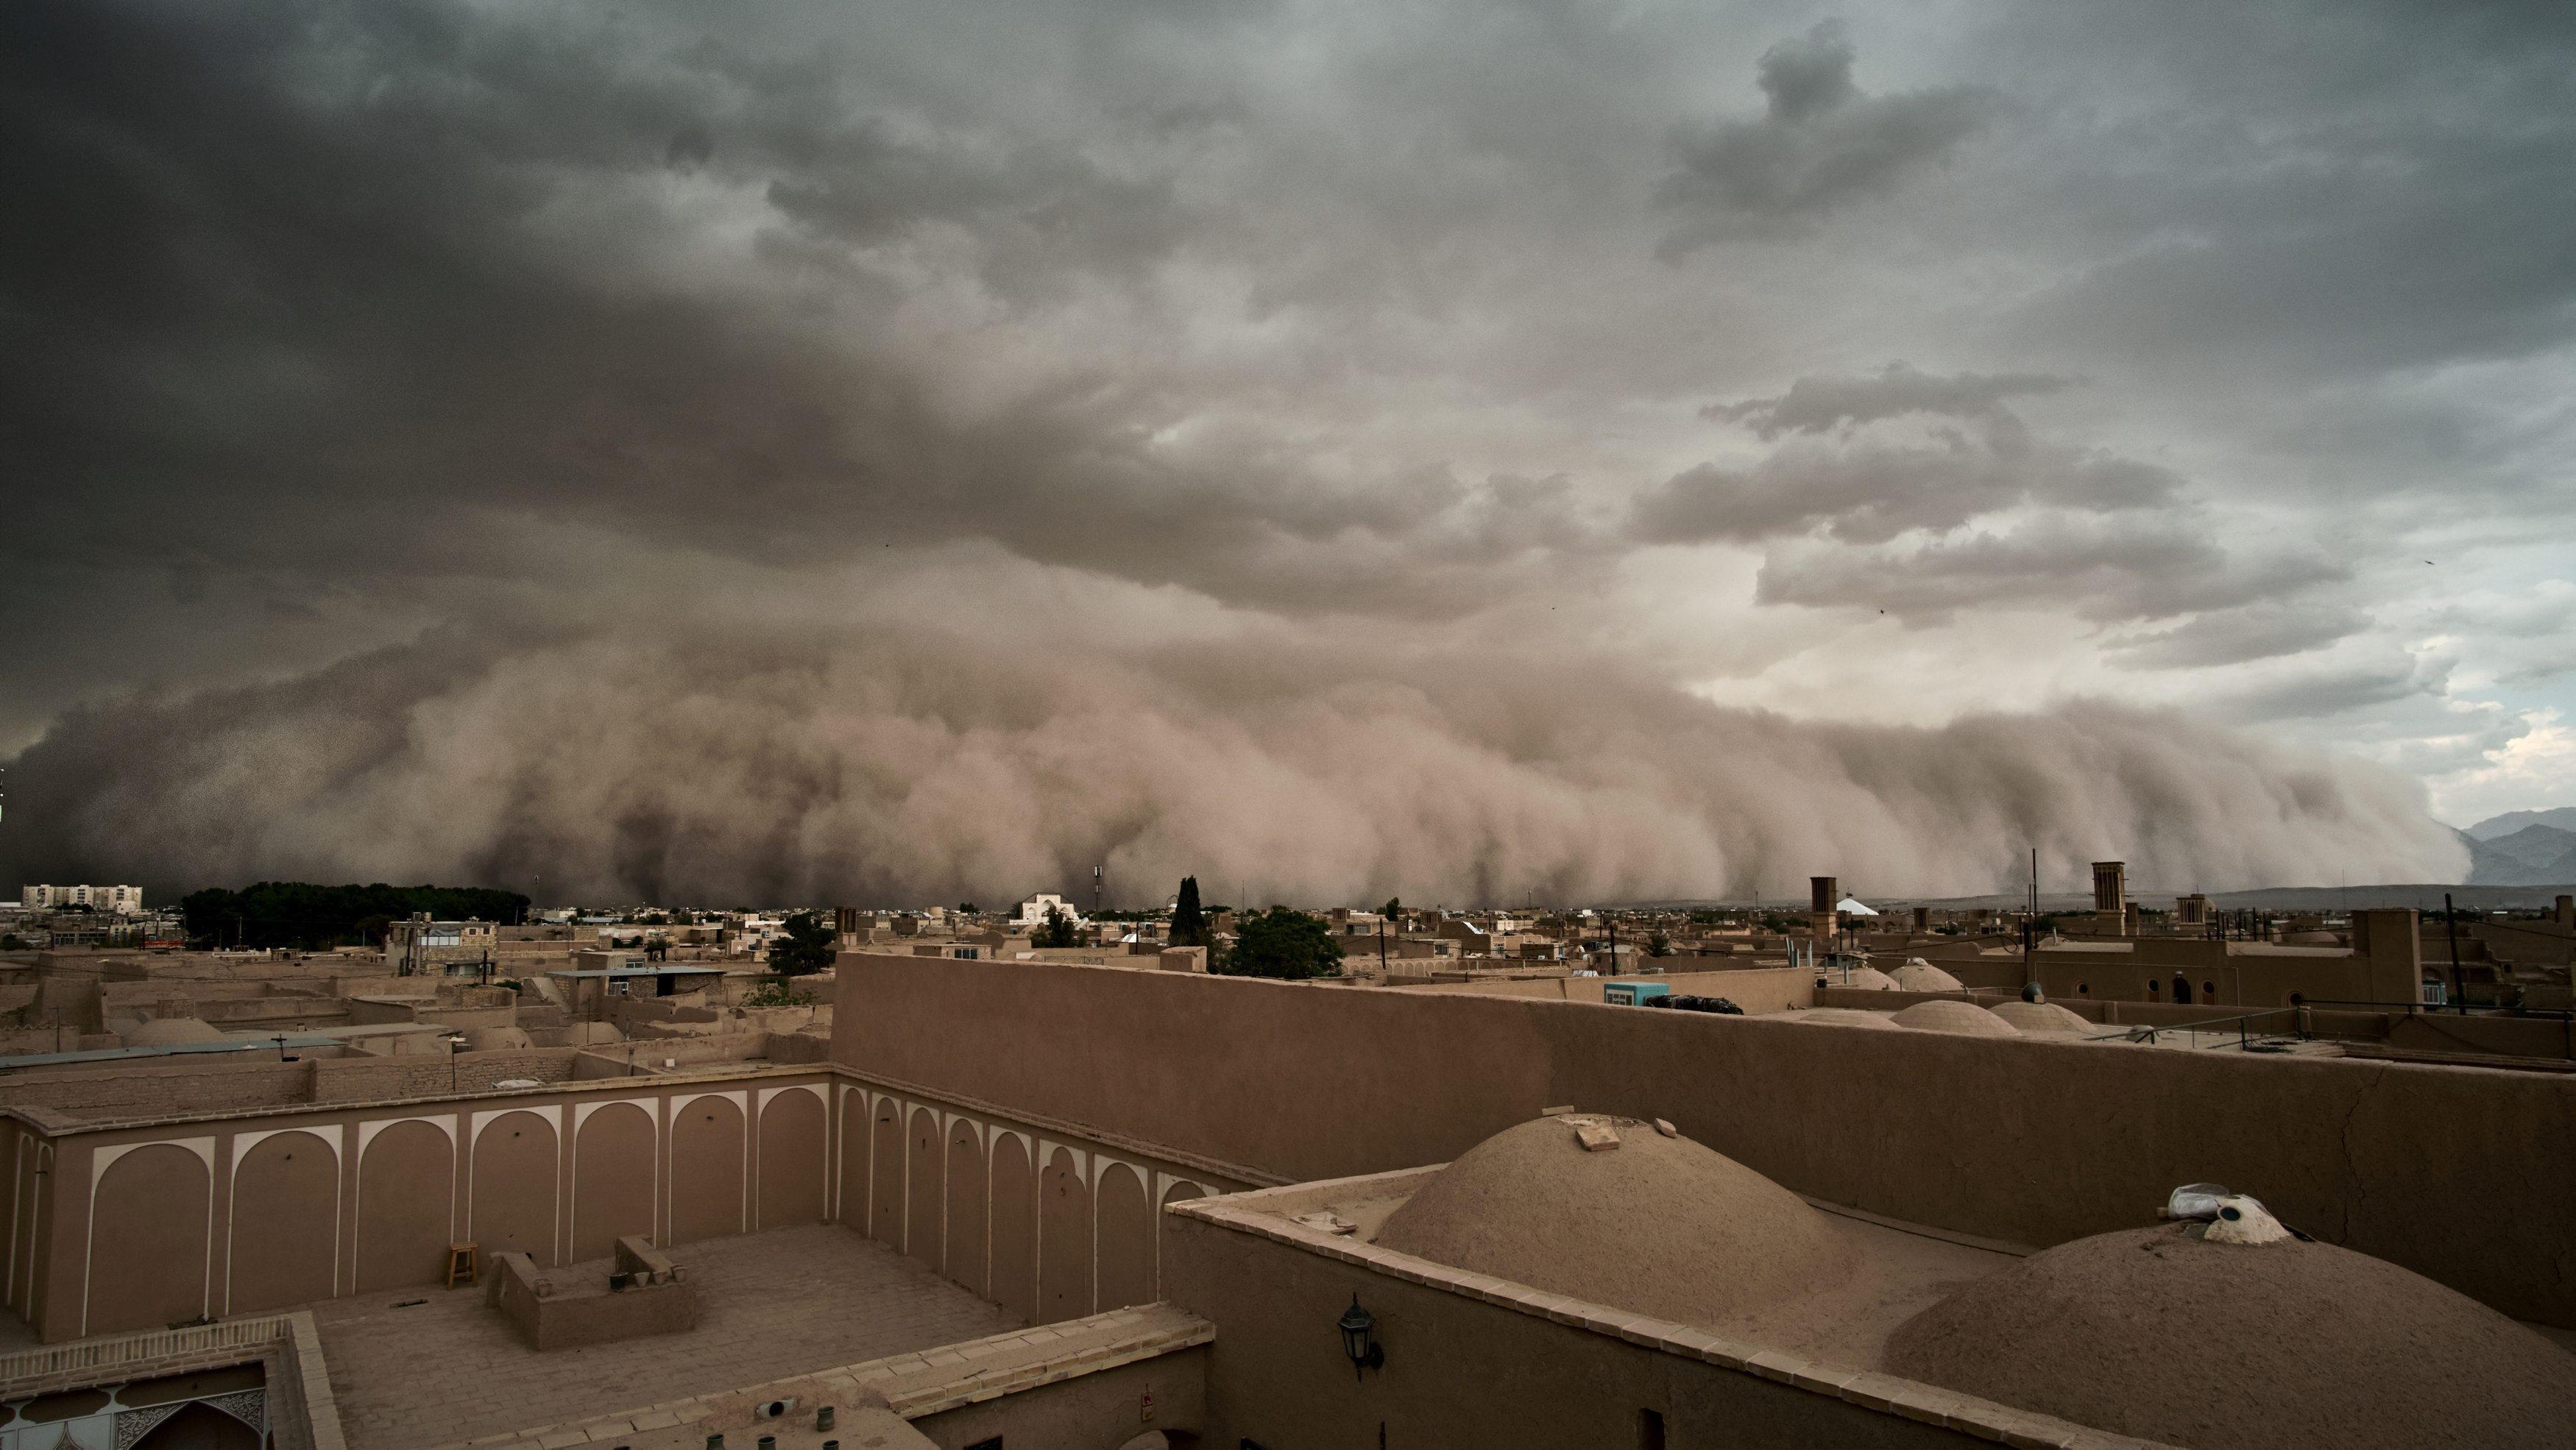 Sandstorm approaches in Yazd